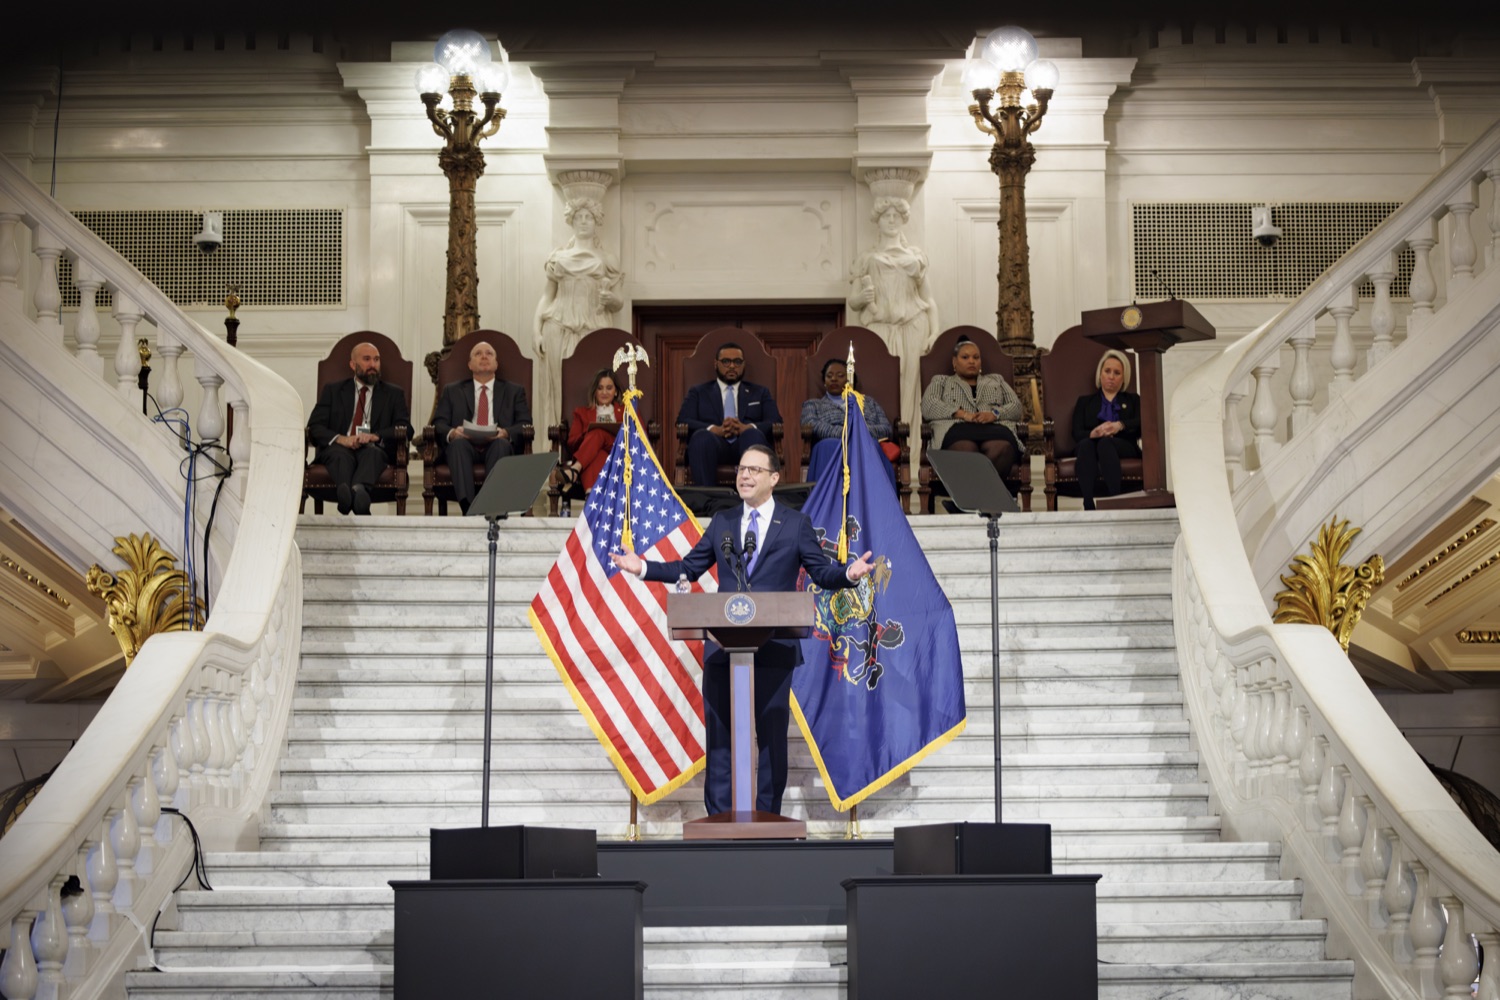 Governor Josh Shapiro presented his 2024-25 budget proposal to the General Assembly and to the people of Pennsylvania - sharing his 'get stuff done' approach and vision to create more opportunity and continue deliveringreal solutions to the most pressing issues Pennsylvanians face. By prioritizing economic opportunity and access to higher education, making historic investments in public education, supporting law enforcement and public safety, ensuring people receive the care they need, and funding critical initiatives to help Pennsylvanians from our cities to our farmlands - this budget will deliver real results for the Commonwealth.<br><a href="https://filesource.amperwave.net/commonwealthofpa/photo/24341_Gov_BudgetAddress_NK_13.JPG" target="_blank">⇣ Download Photo</a>